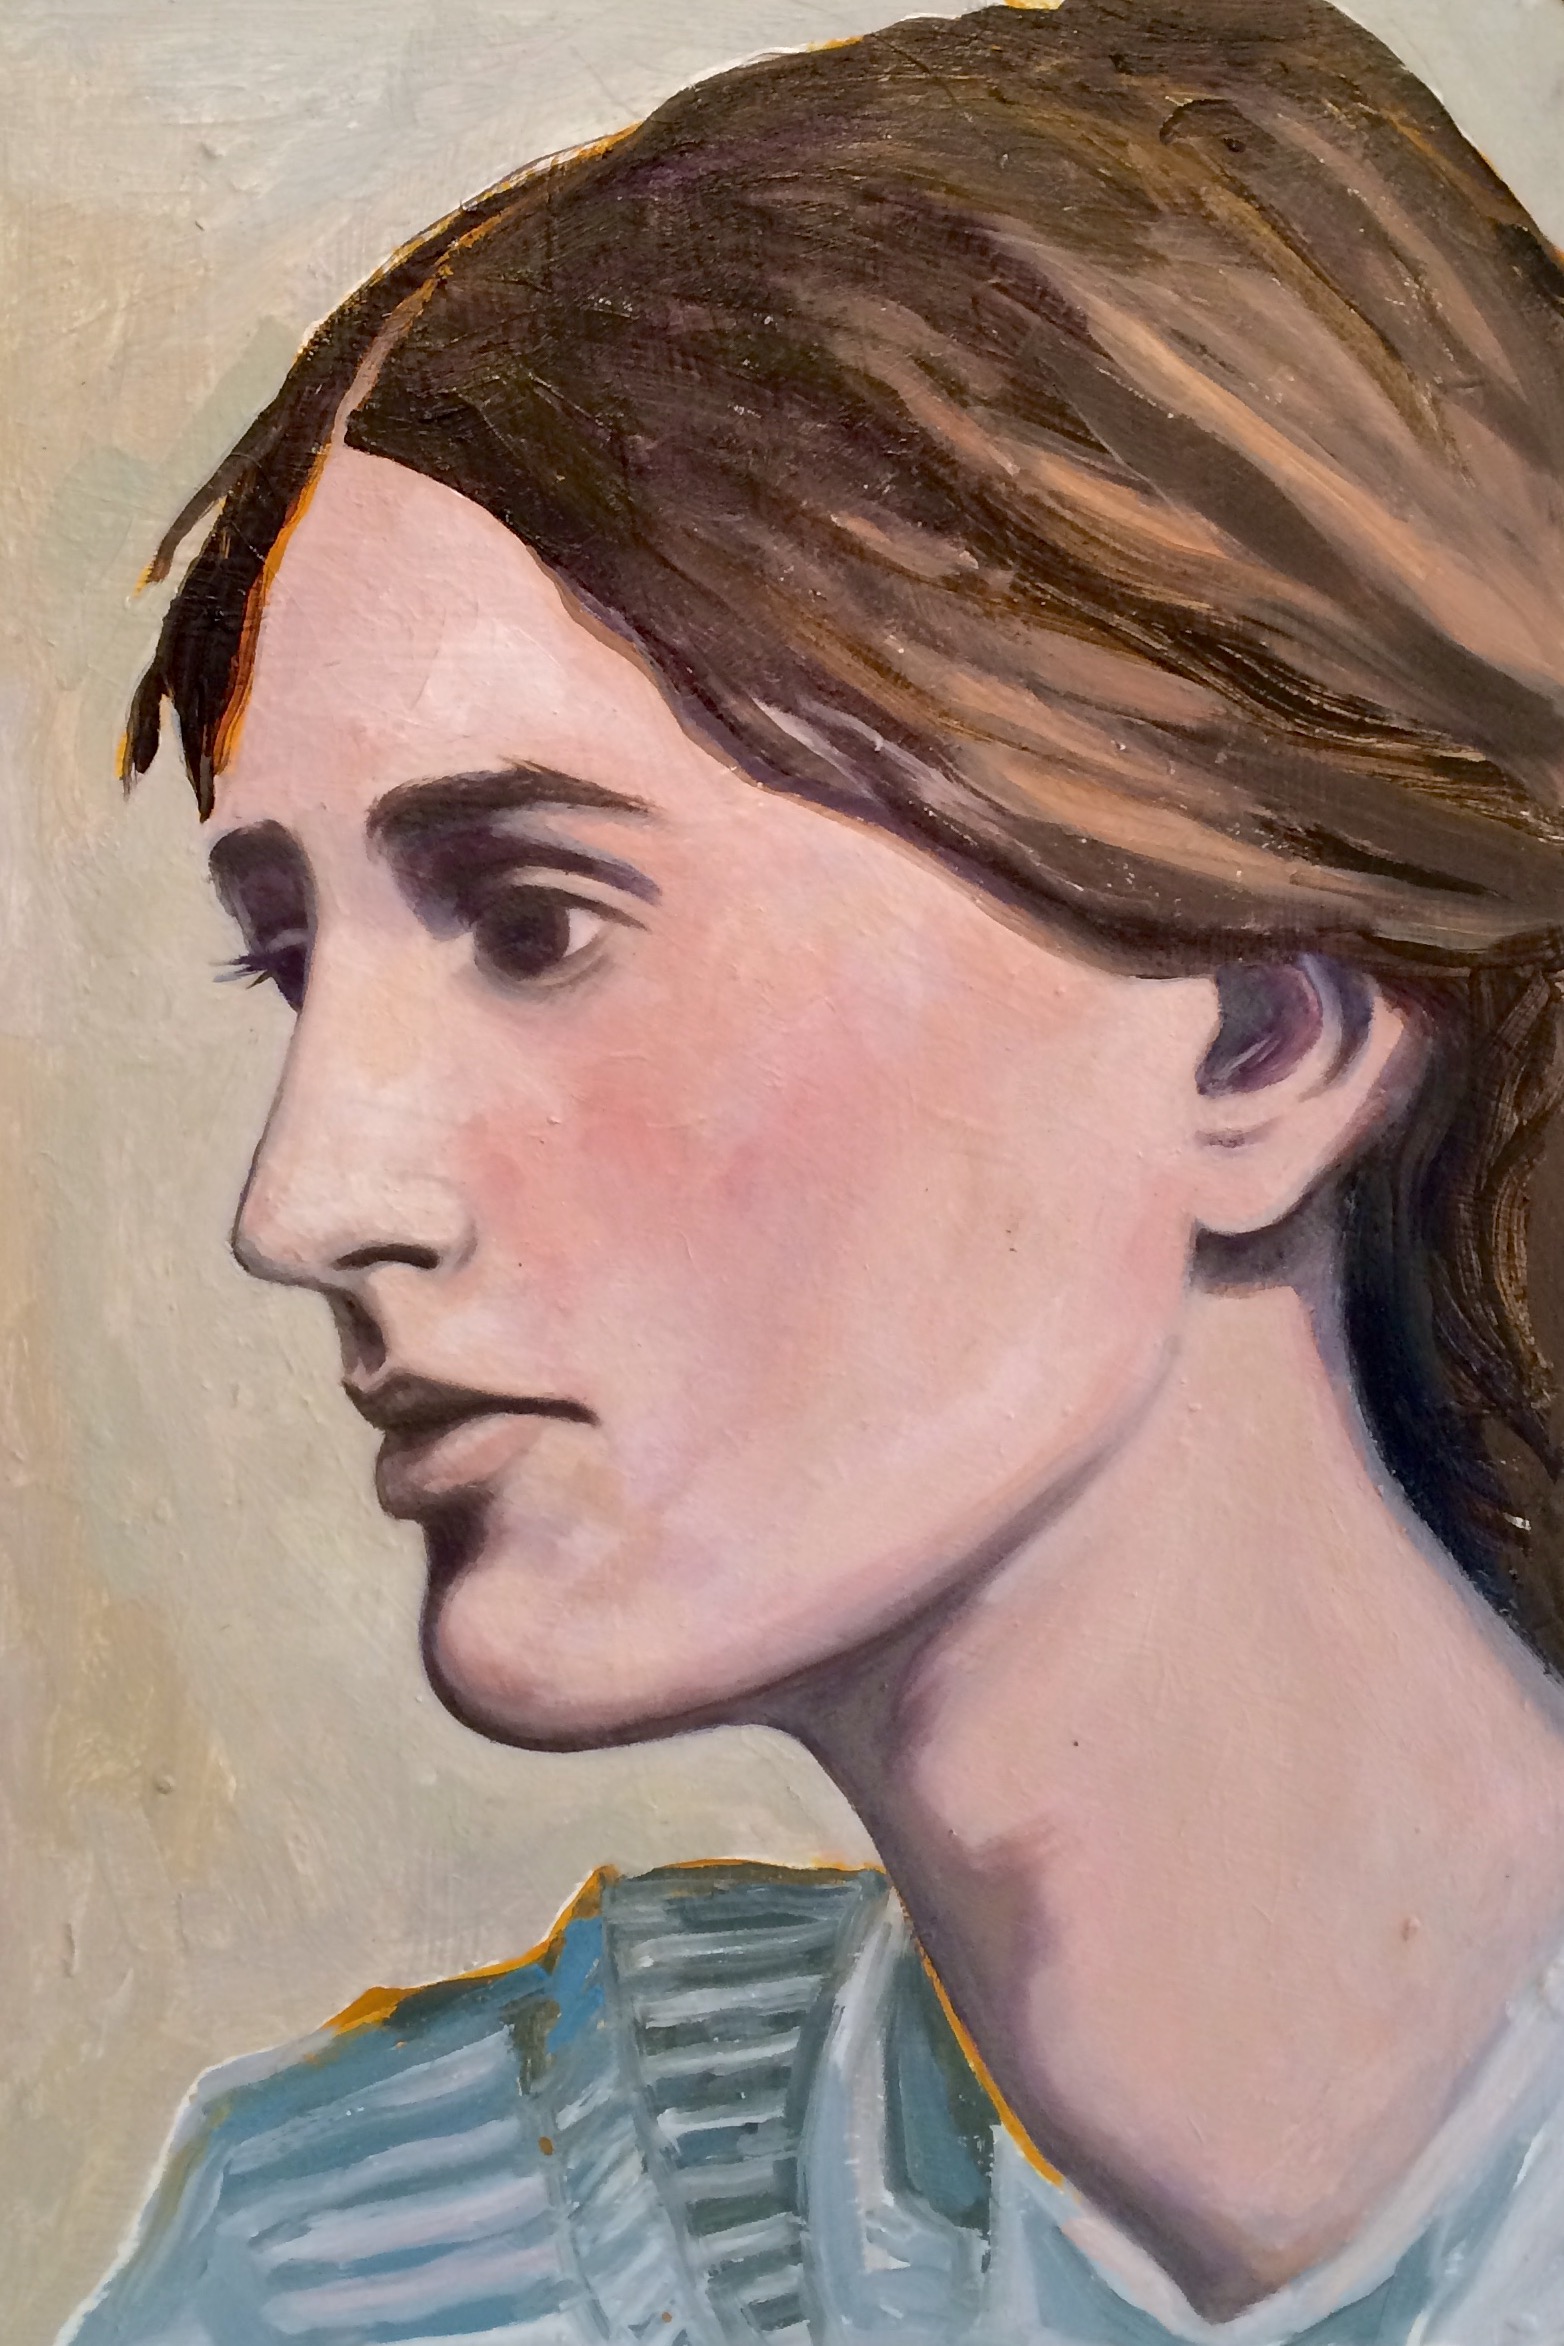   Virginia Woolf II   oil on panel  14 x 8 inches, 2015   NFS  